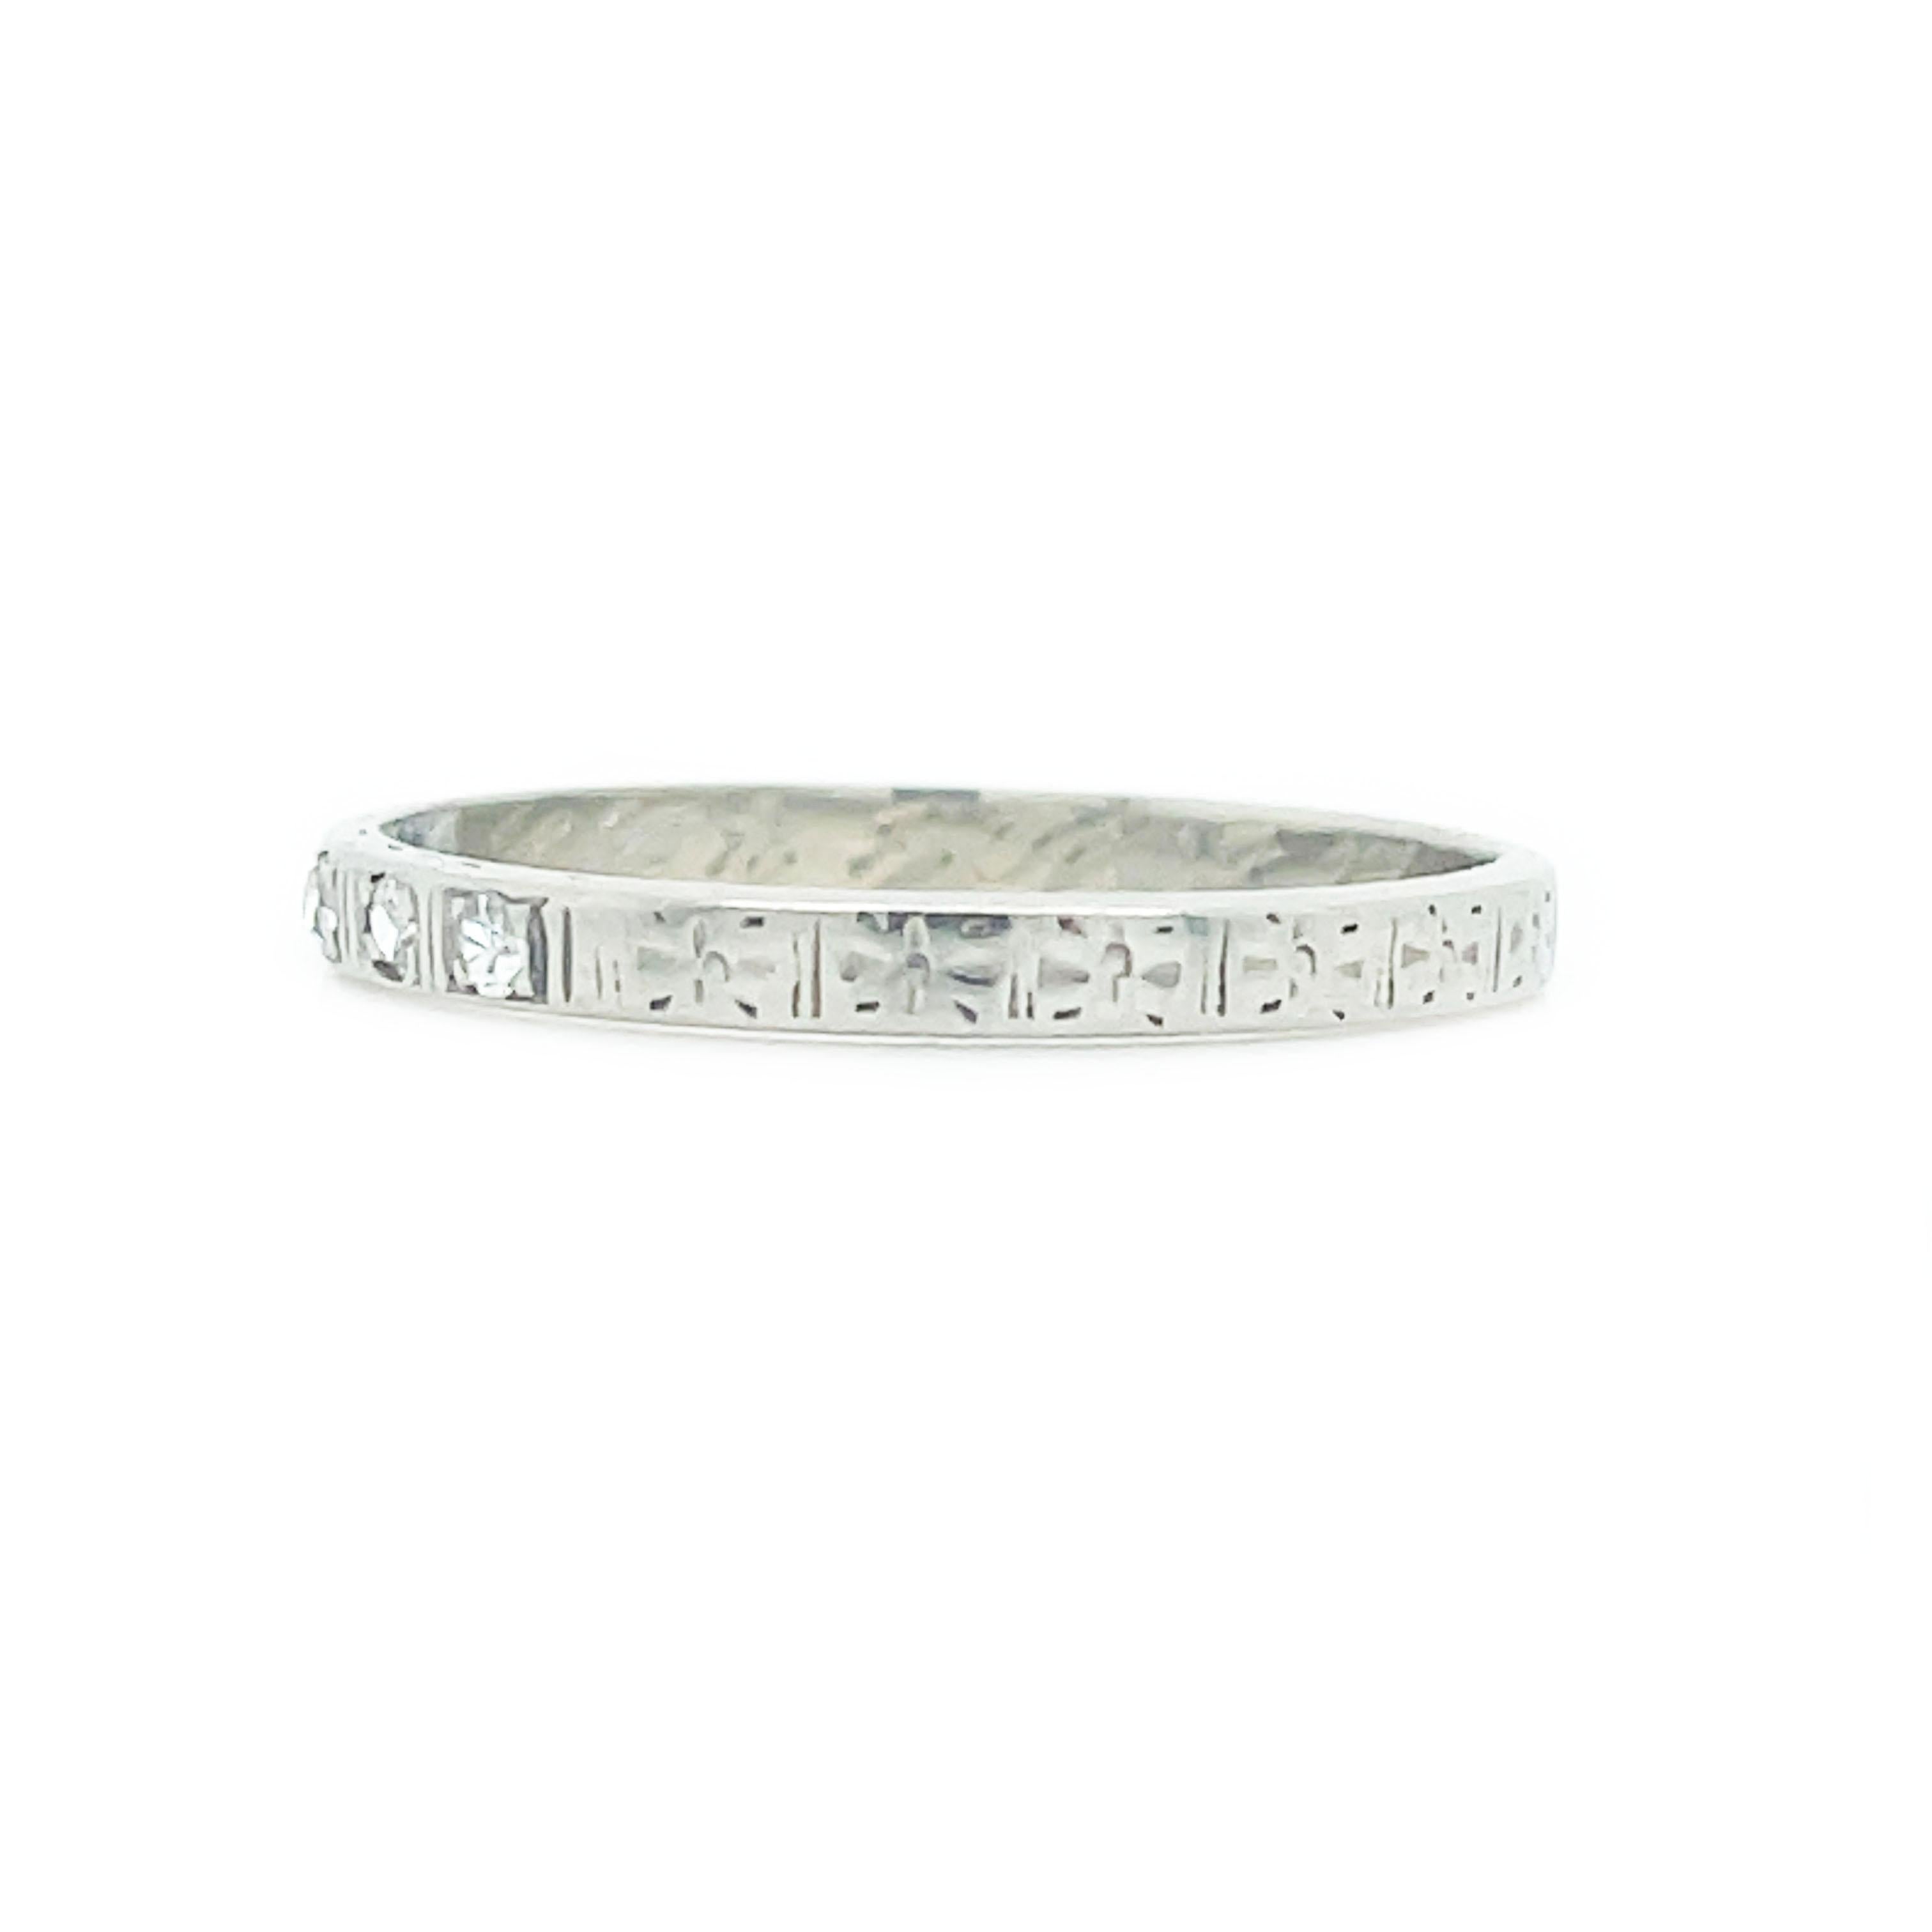 This is a lovely Art Deco band set in 18K white gold that features gorgeous hand engraving and five sparkling diamonds! Hand engraved with tiny starbursts, this elegant wedding band twinkles with five scintillating single-cut diamonds. A perfect